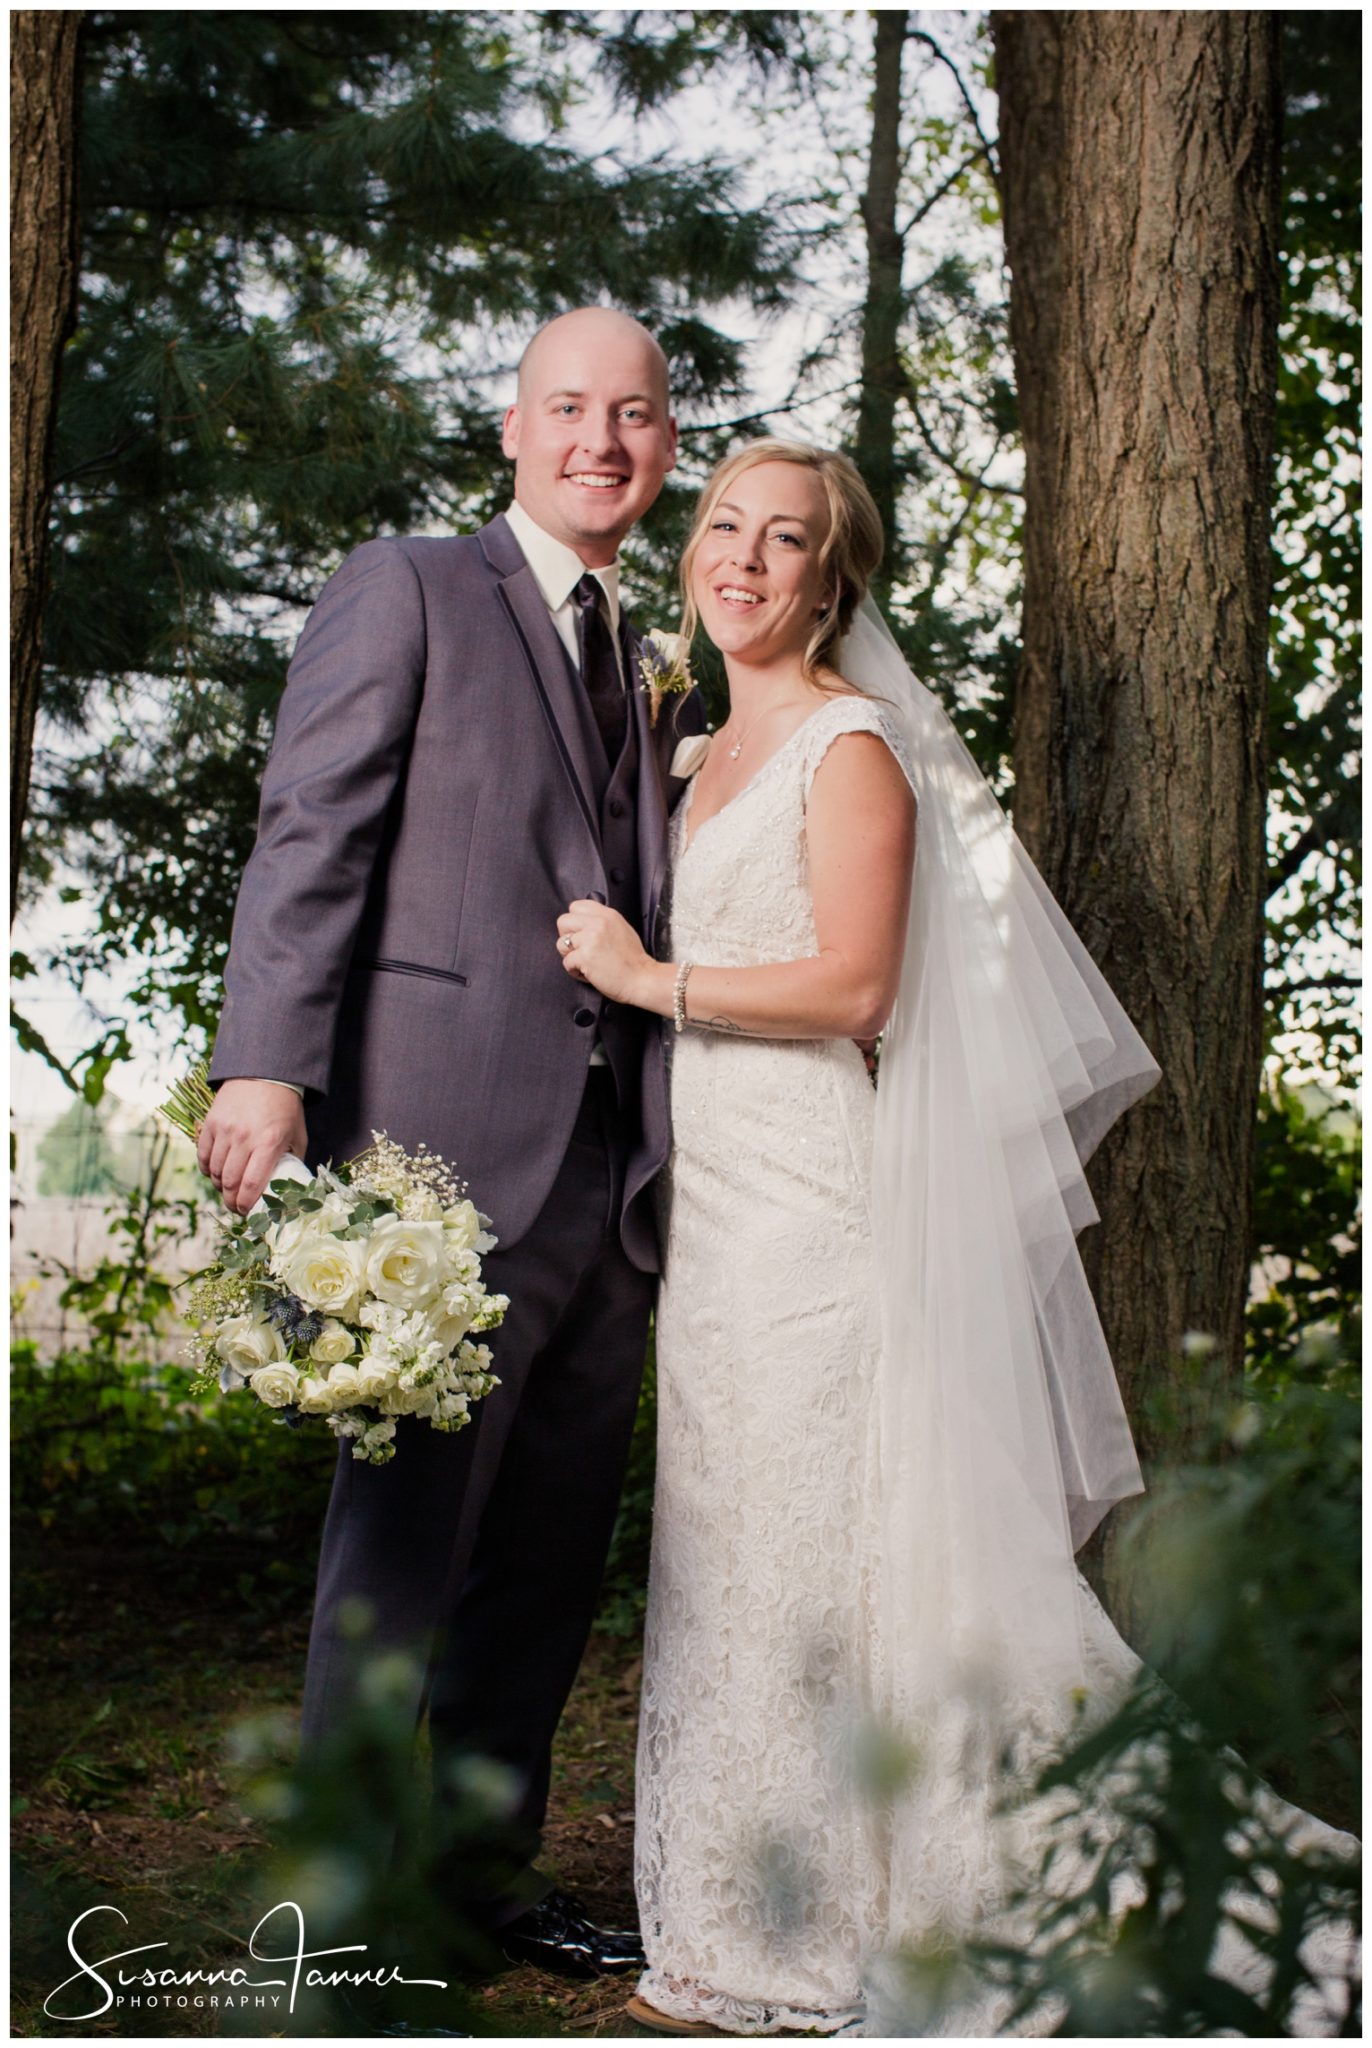 Indianapolis Outdoor Wedding, bride and groom portrait surrounded by pine trees